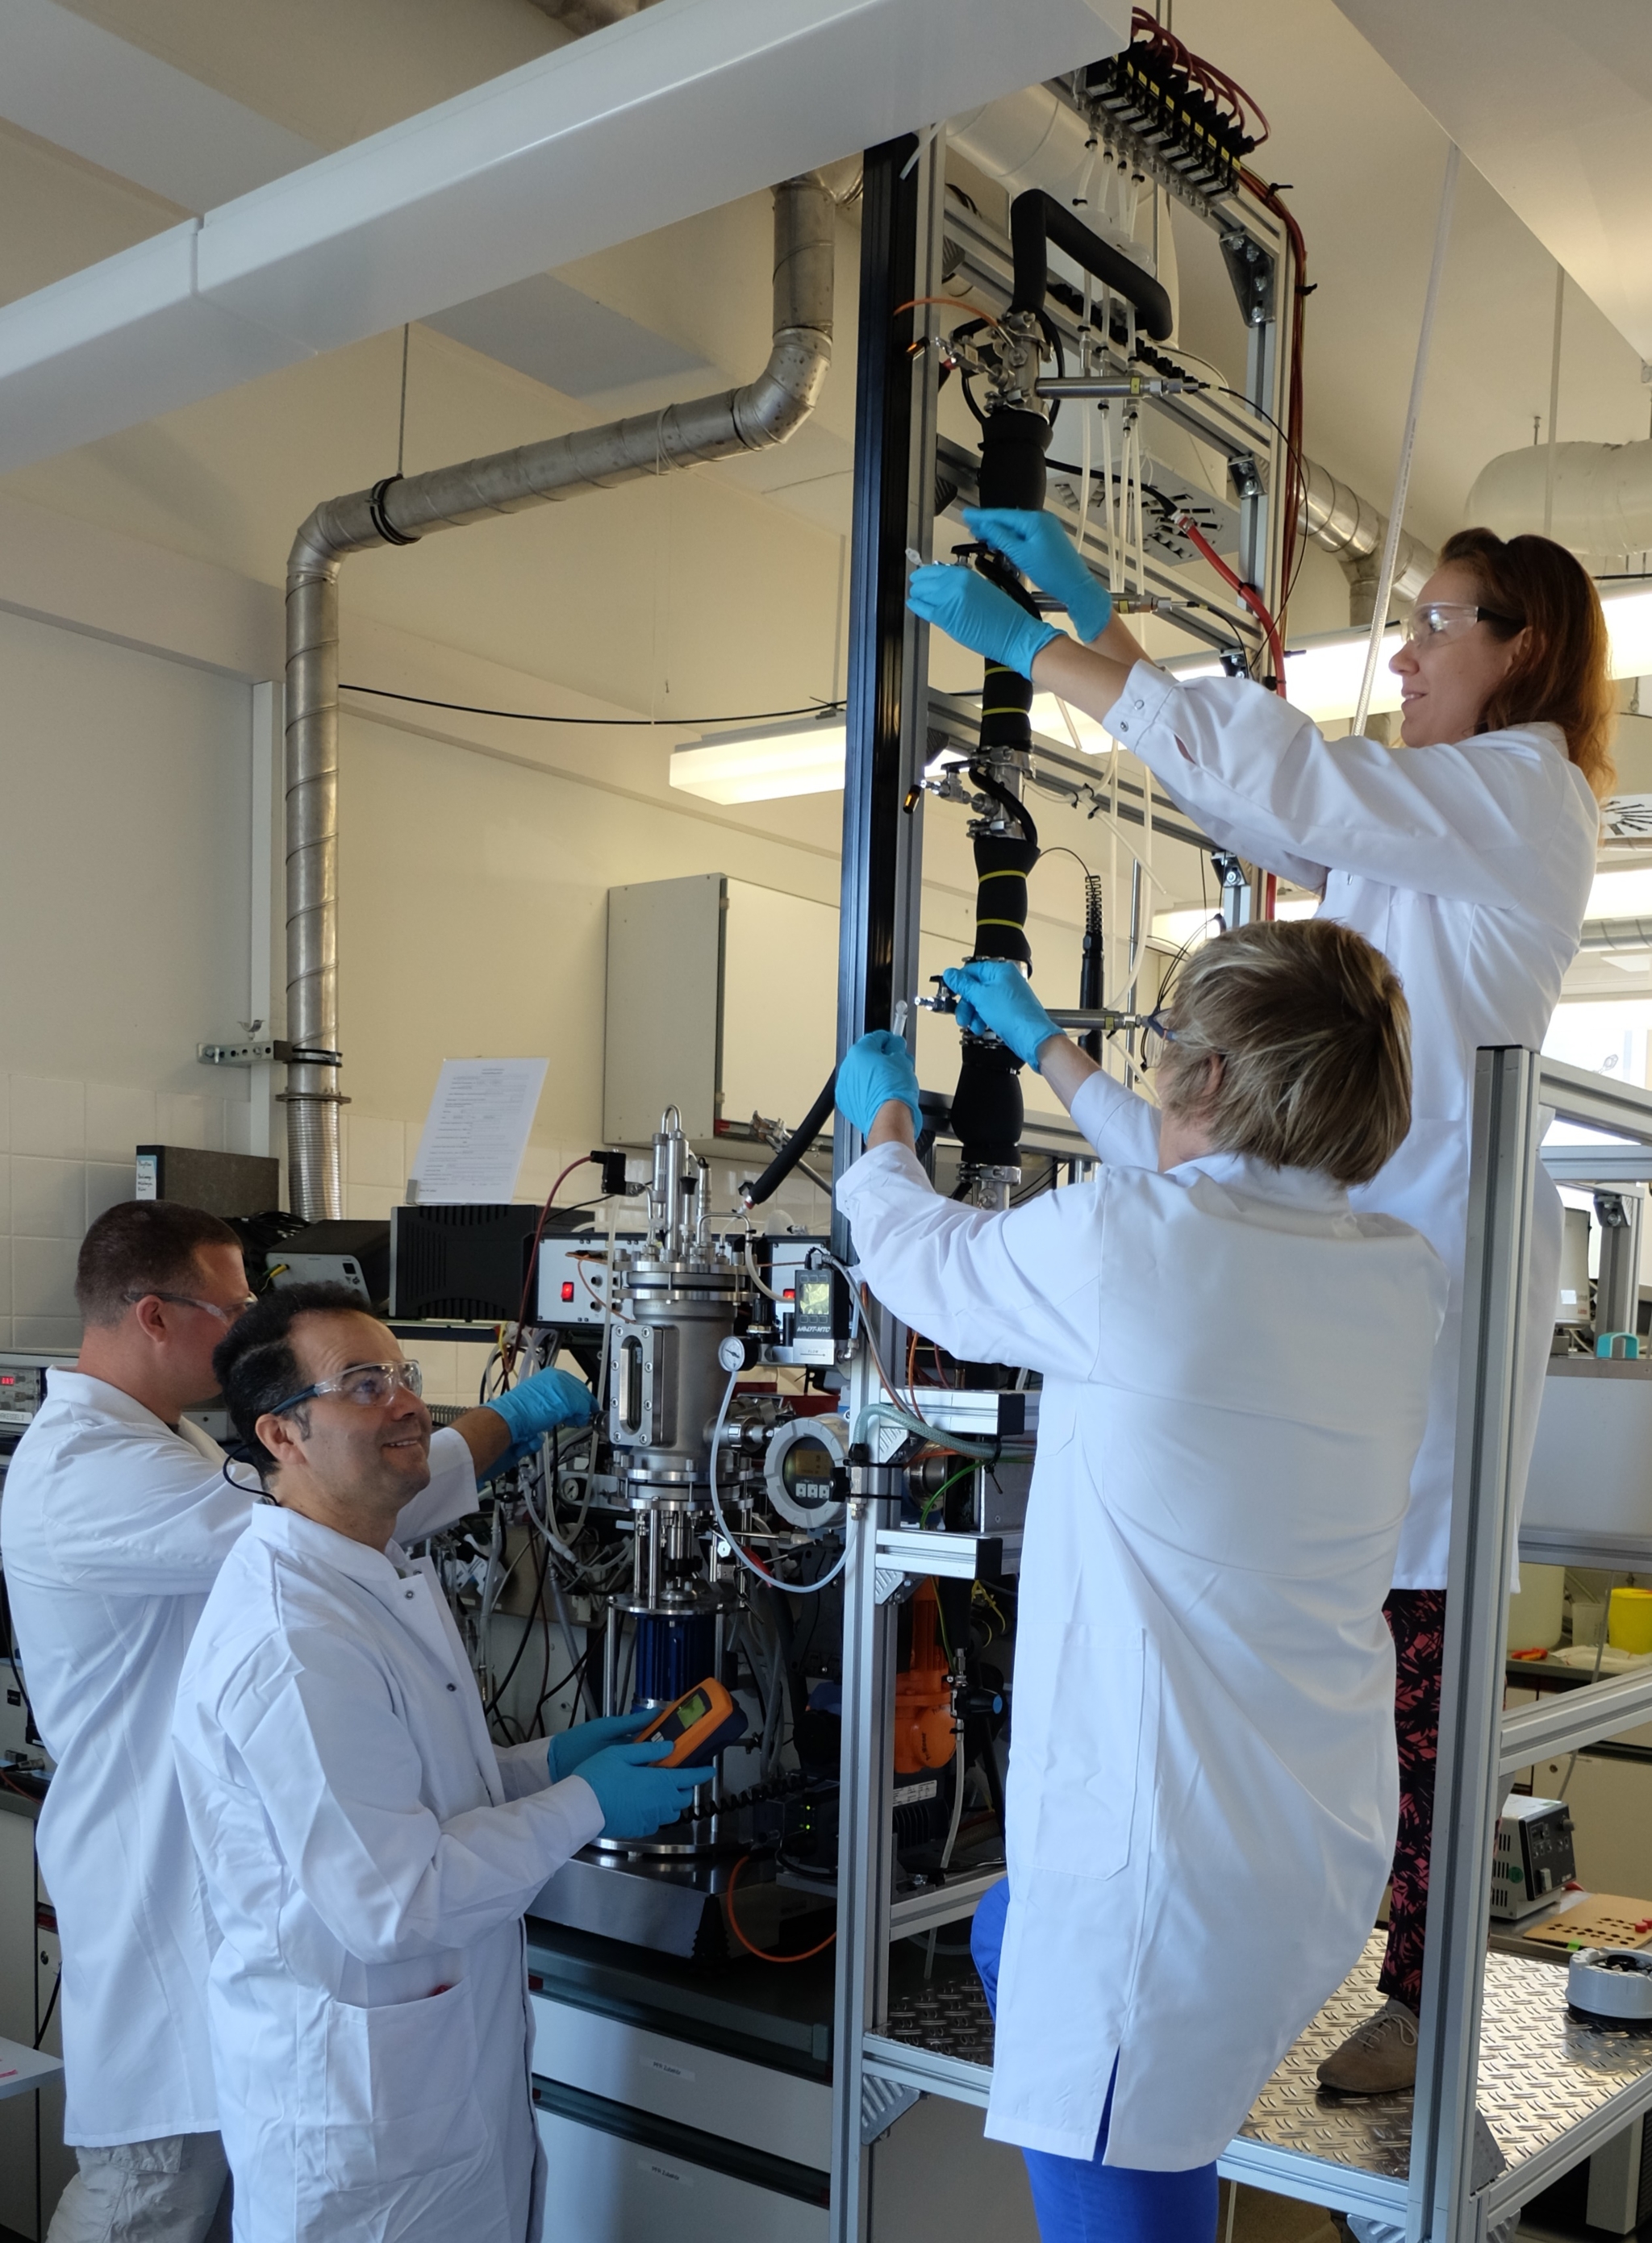 The IBVT team (from right to left) - Joana Siemen, Michael Löffler, Salah Lagrami and Alexander Broicher – adjusting the experimental system that they use to generate key data required for the simulation of large-scale production.